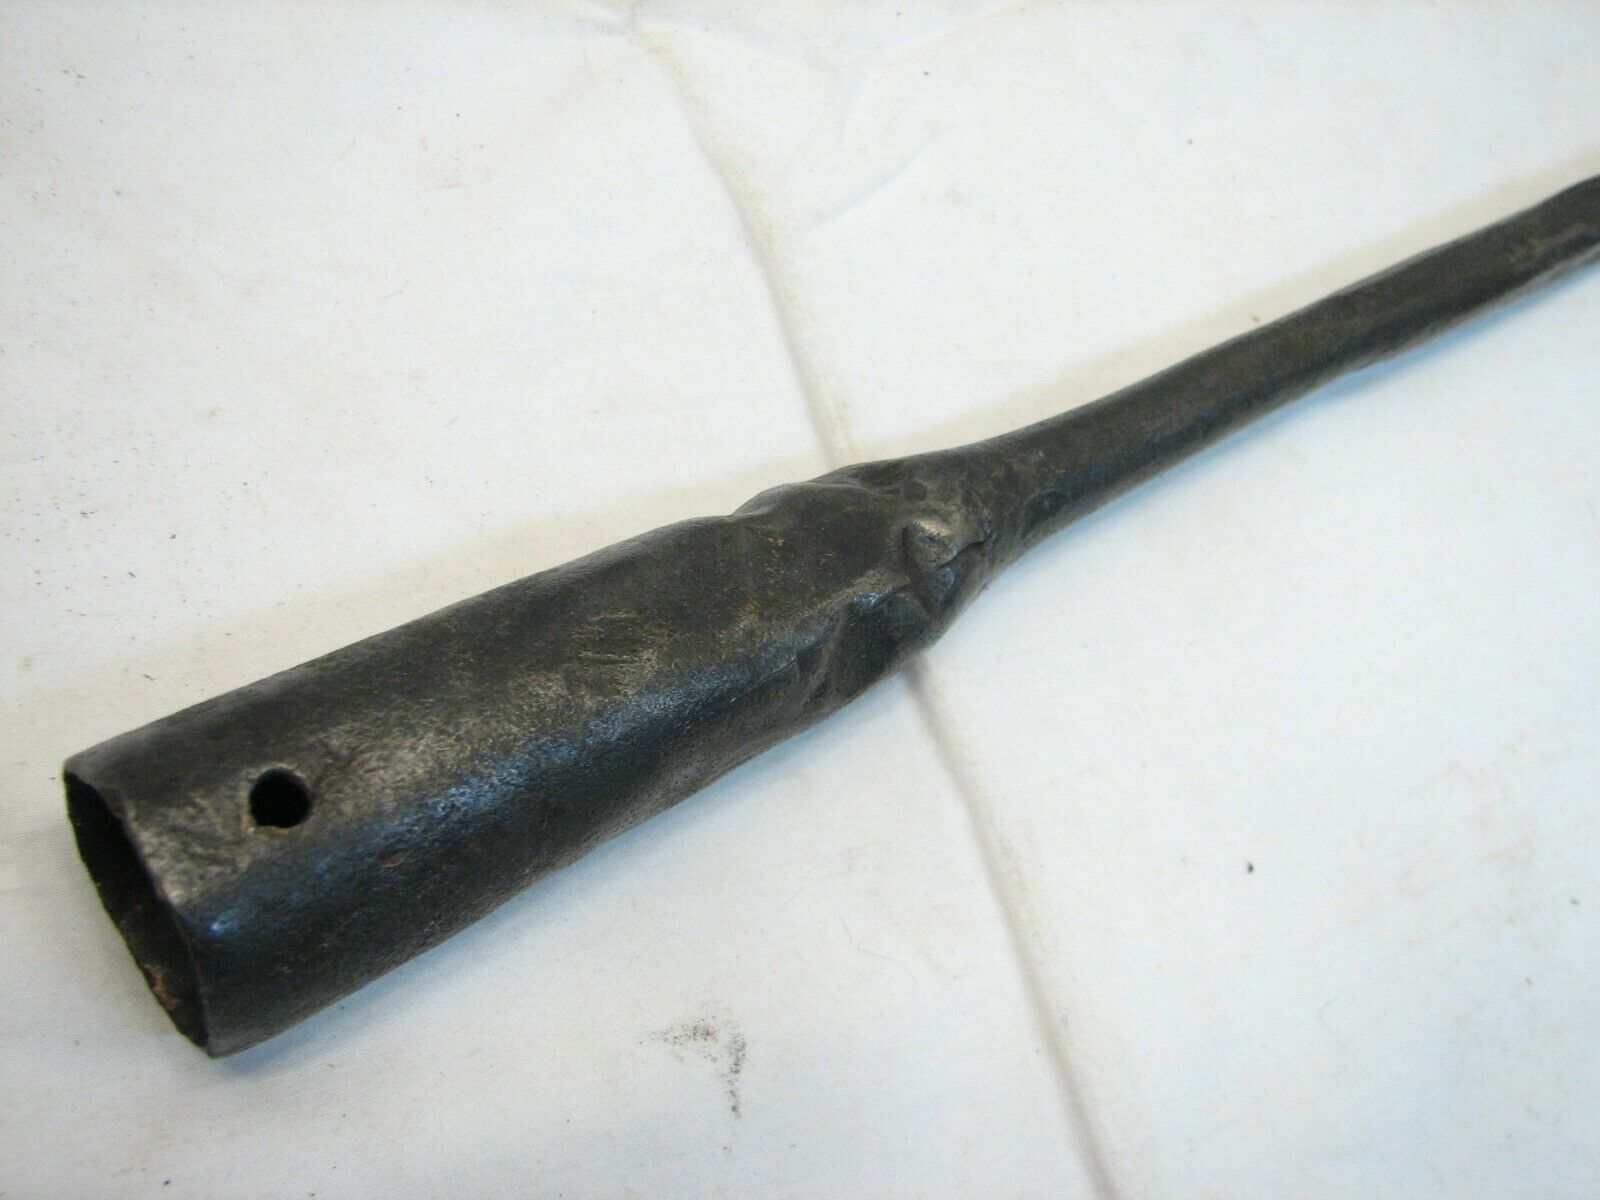 Antique 6-Tine Fish Eel Frog Gig Tool Spear Head Hand Forged